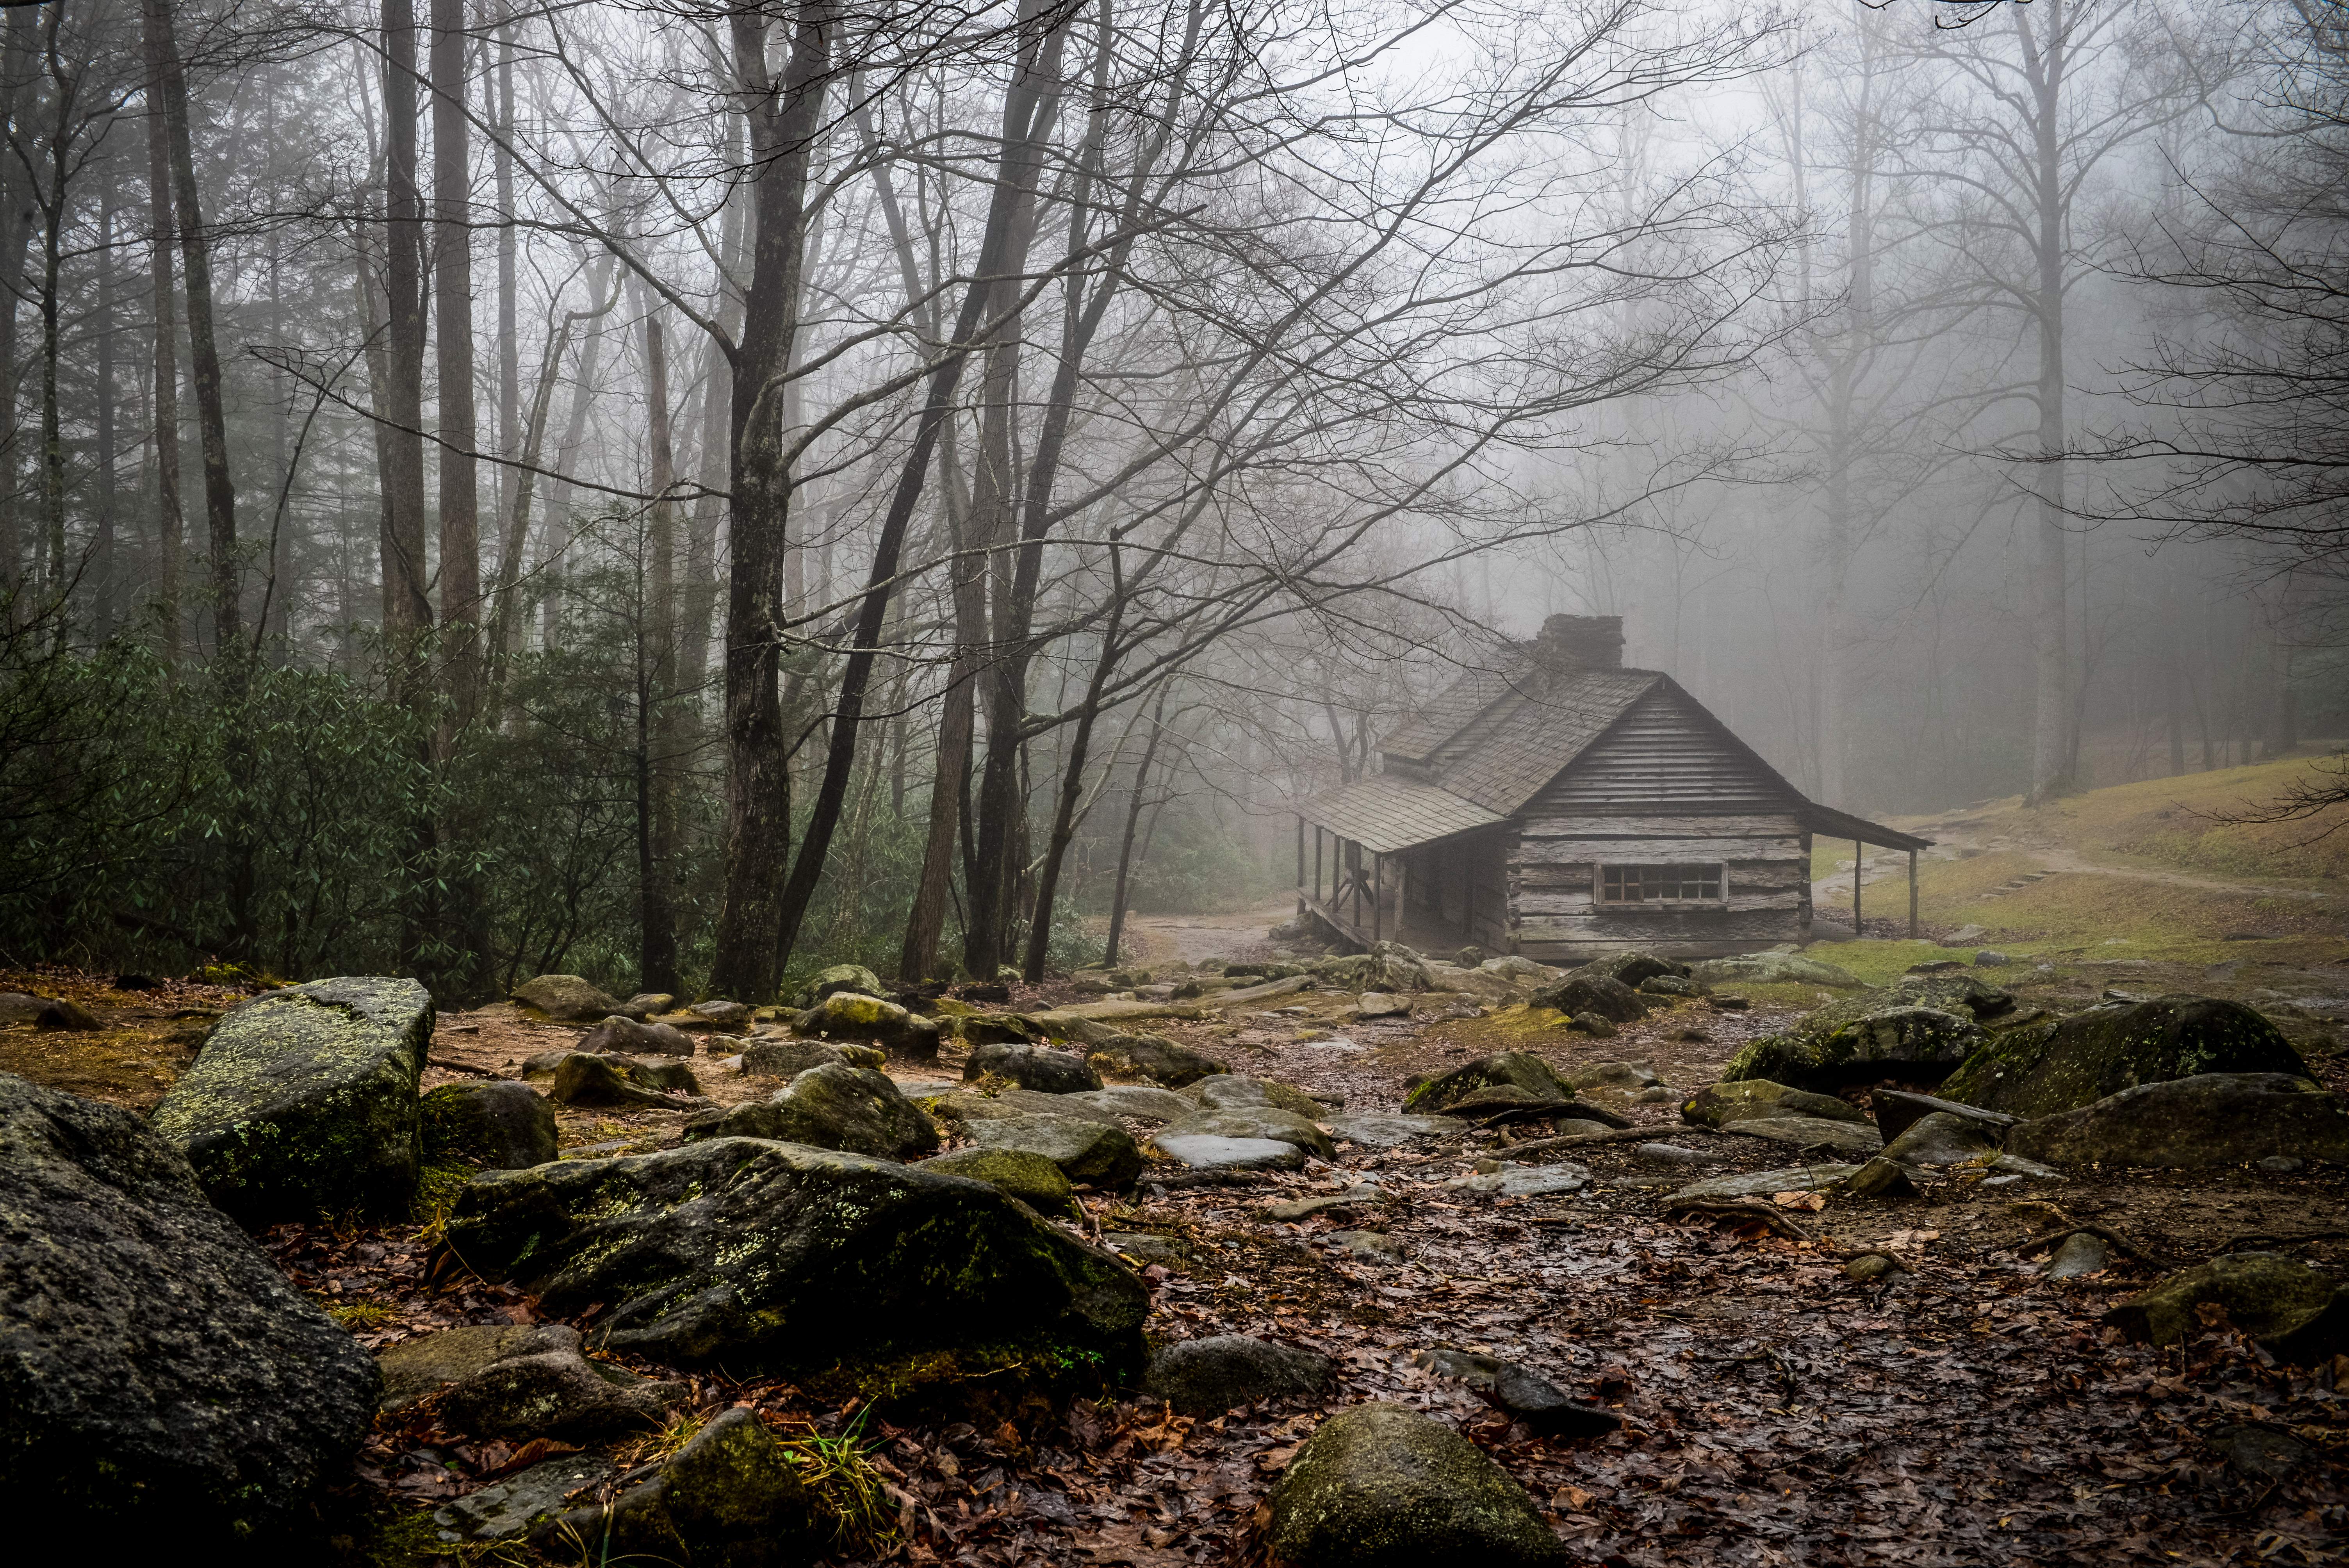 Abandoned house in the forest | Source: Shutterstock.com